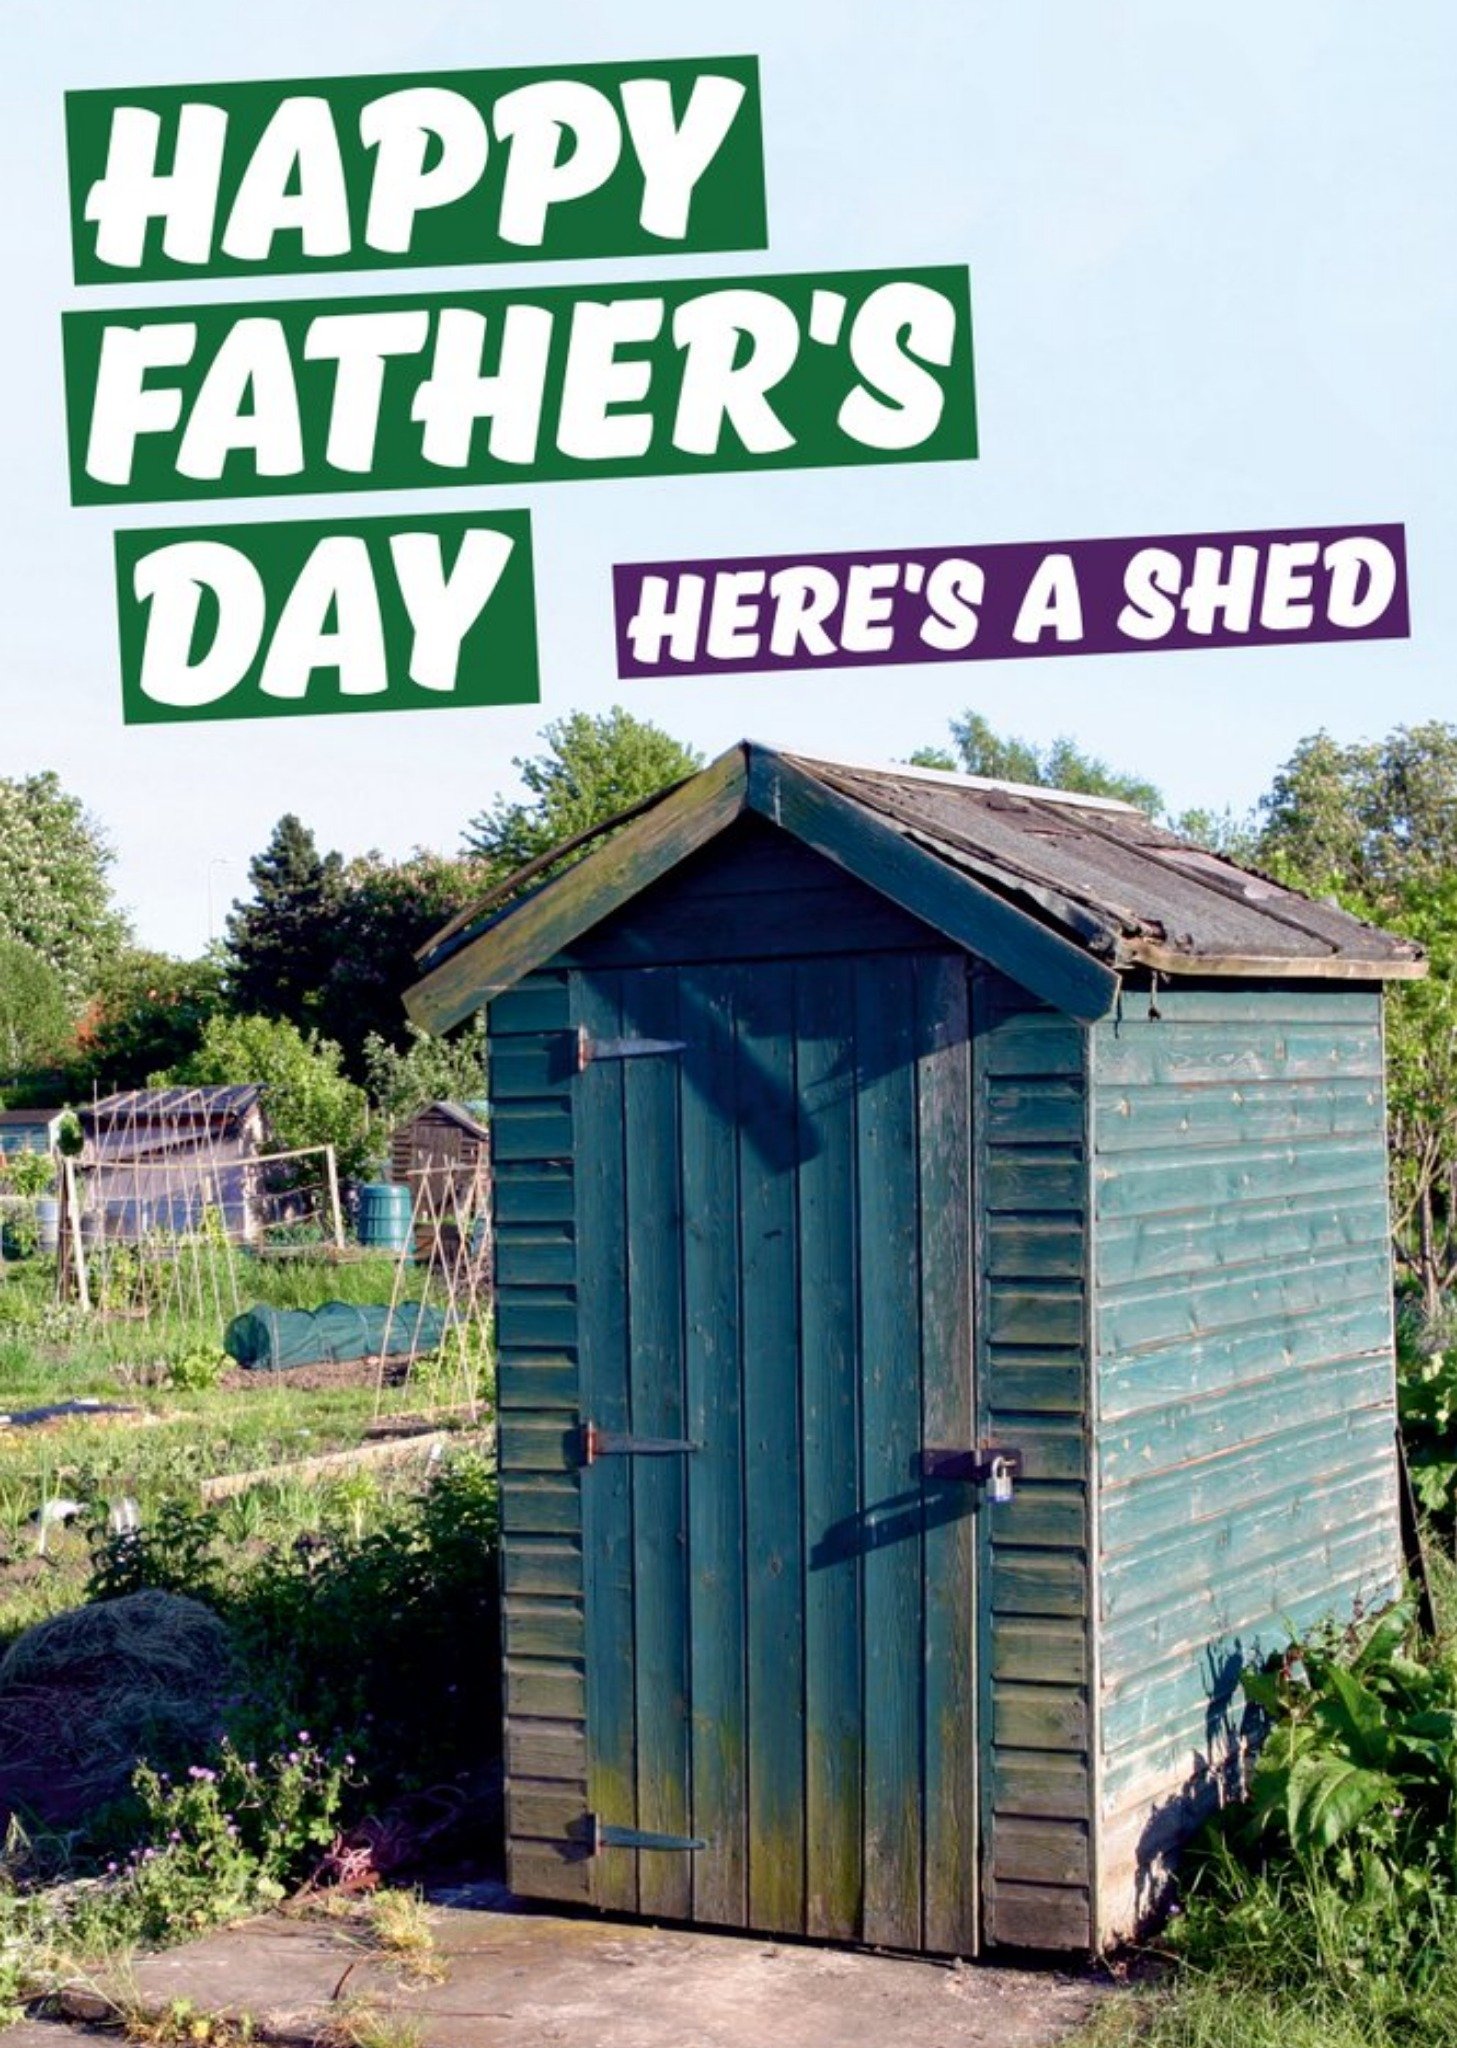 Moonpig Funny Happy Father's Day Here's A Shed Card Ecard